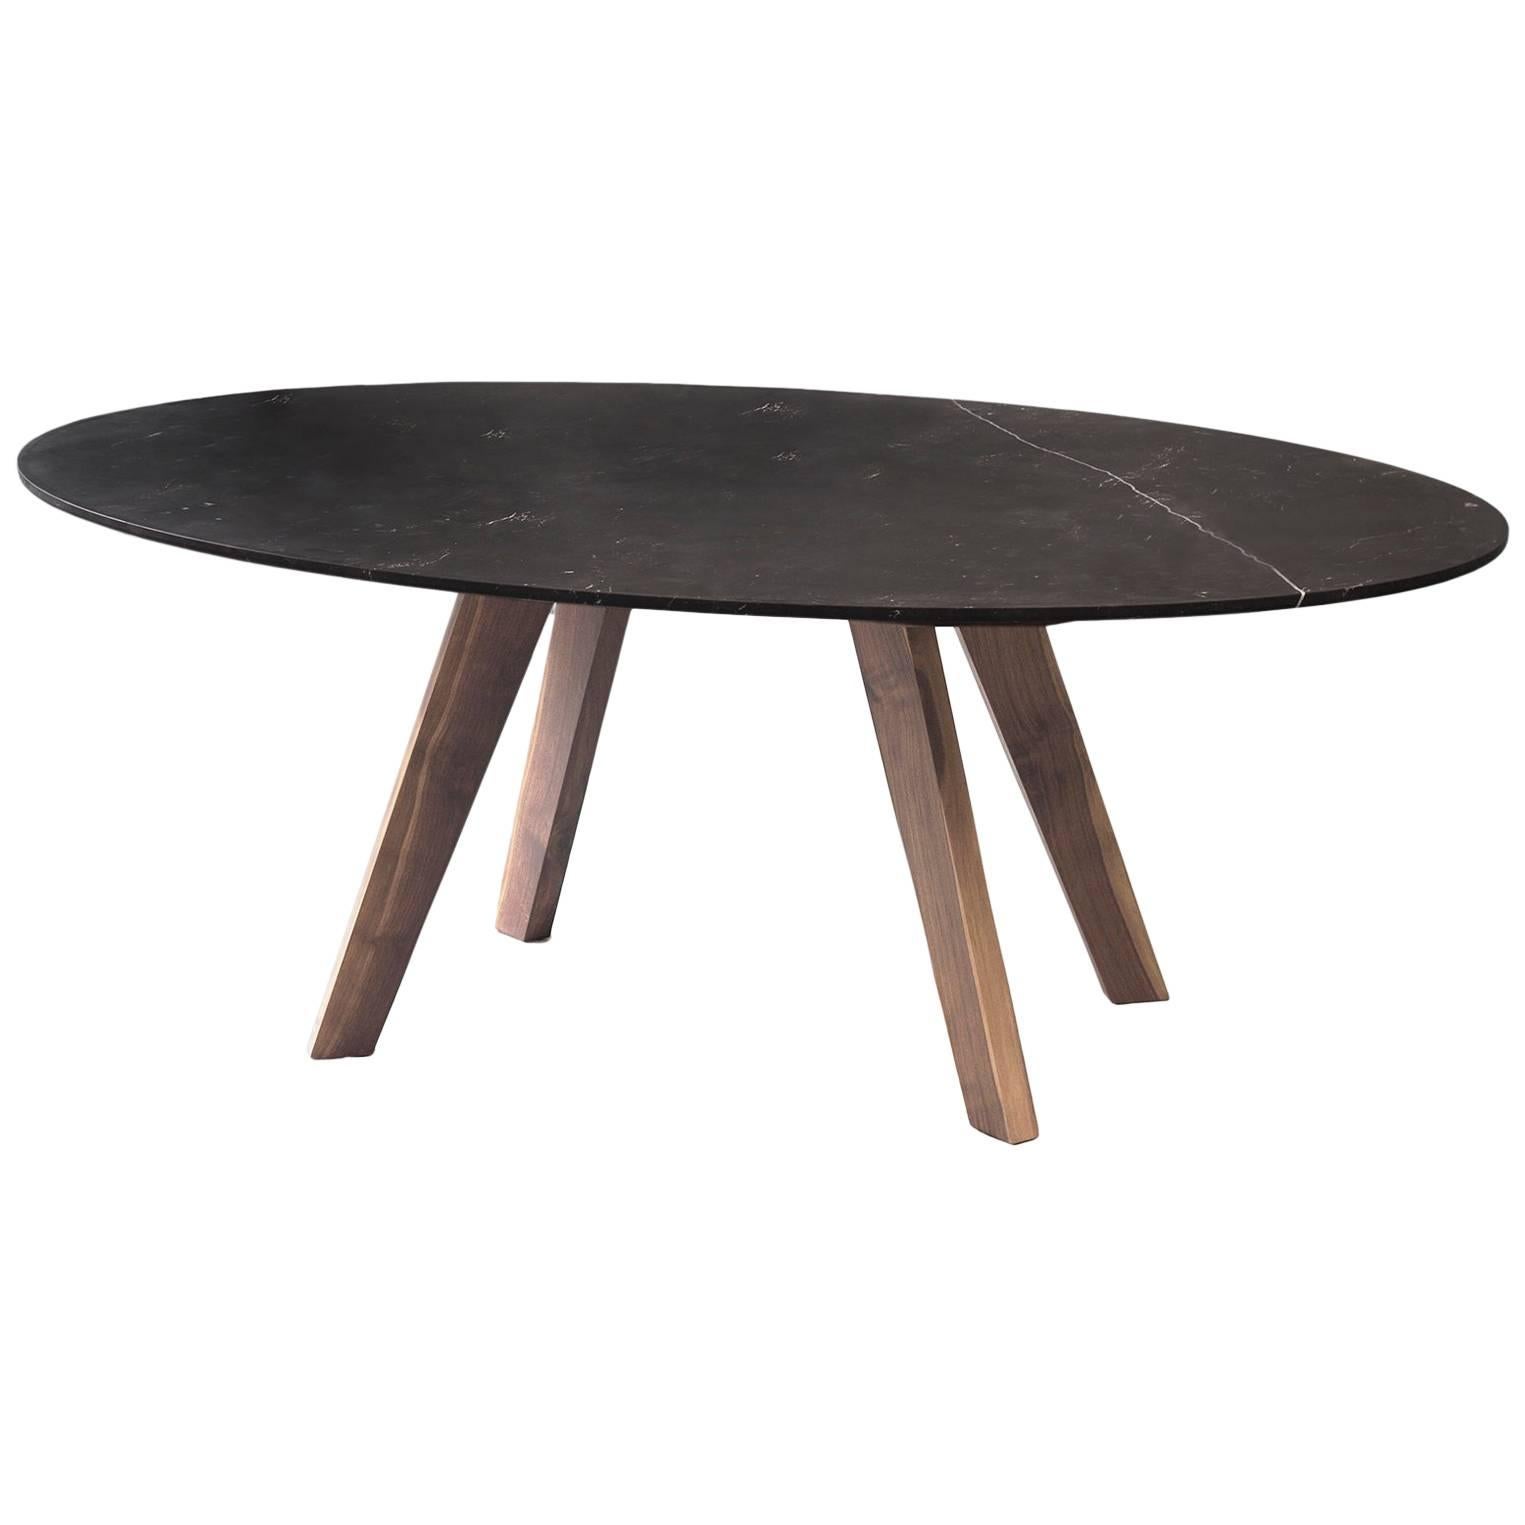 Contemporary Oval Table, Granite, and Walnut, Designed by LCMX im Angebot